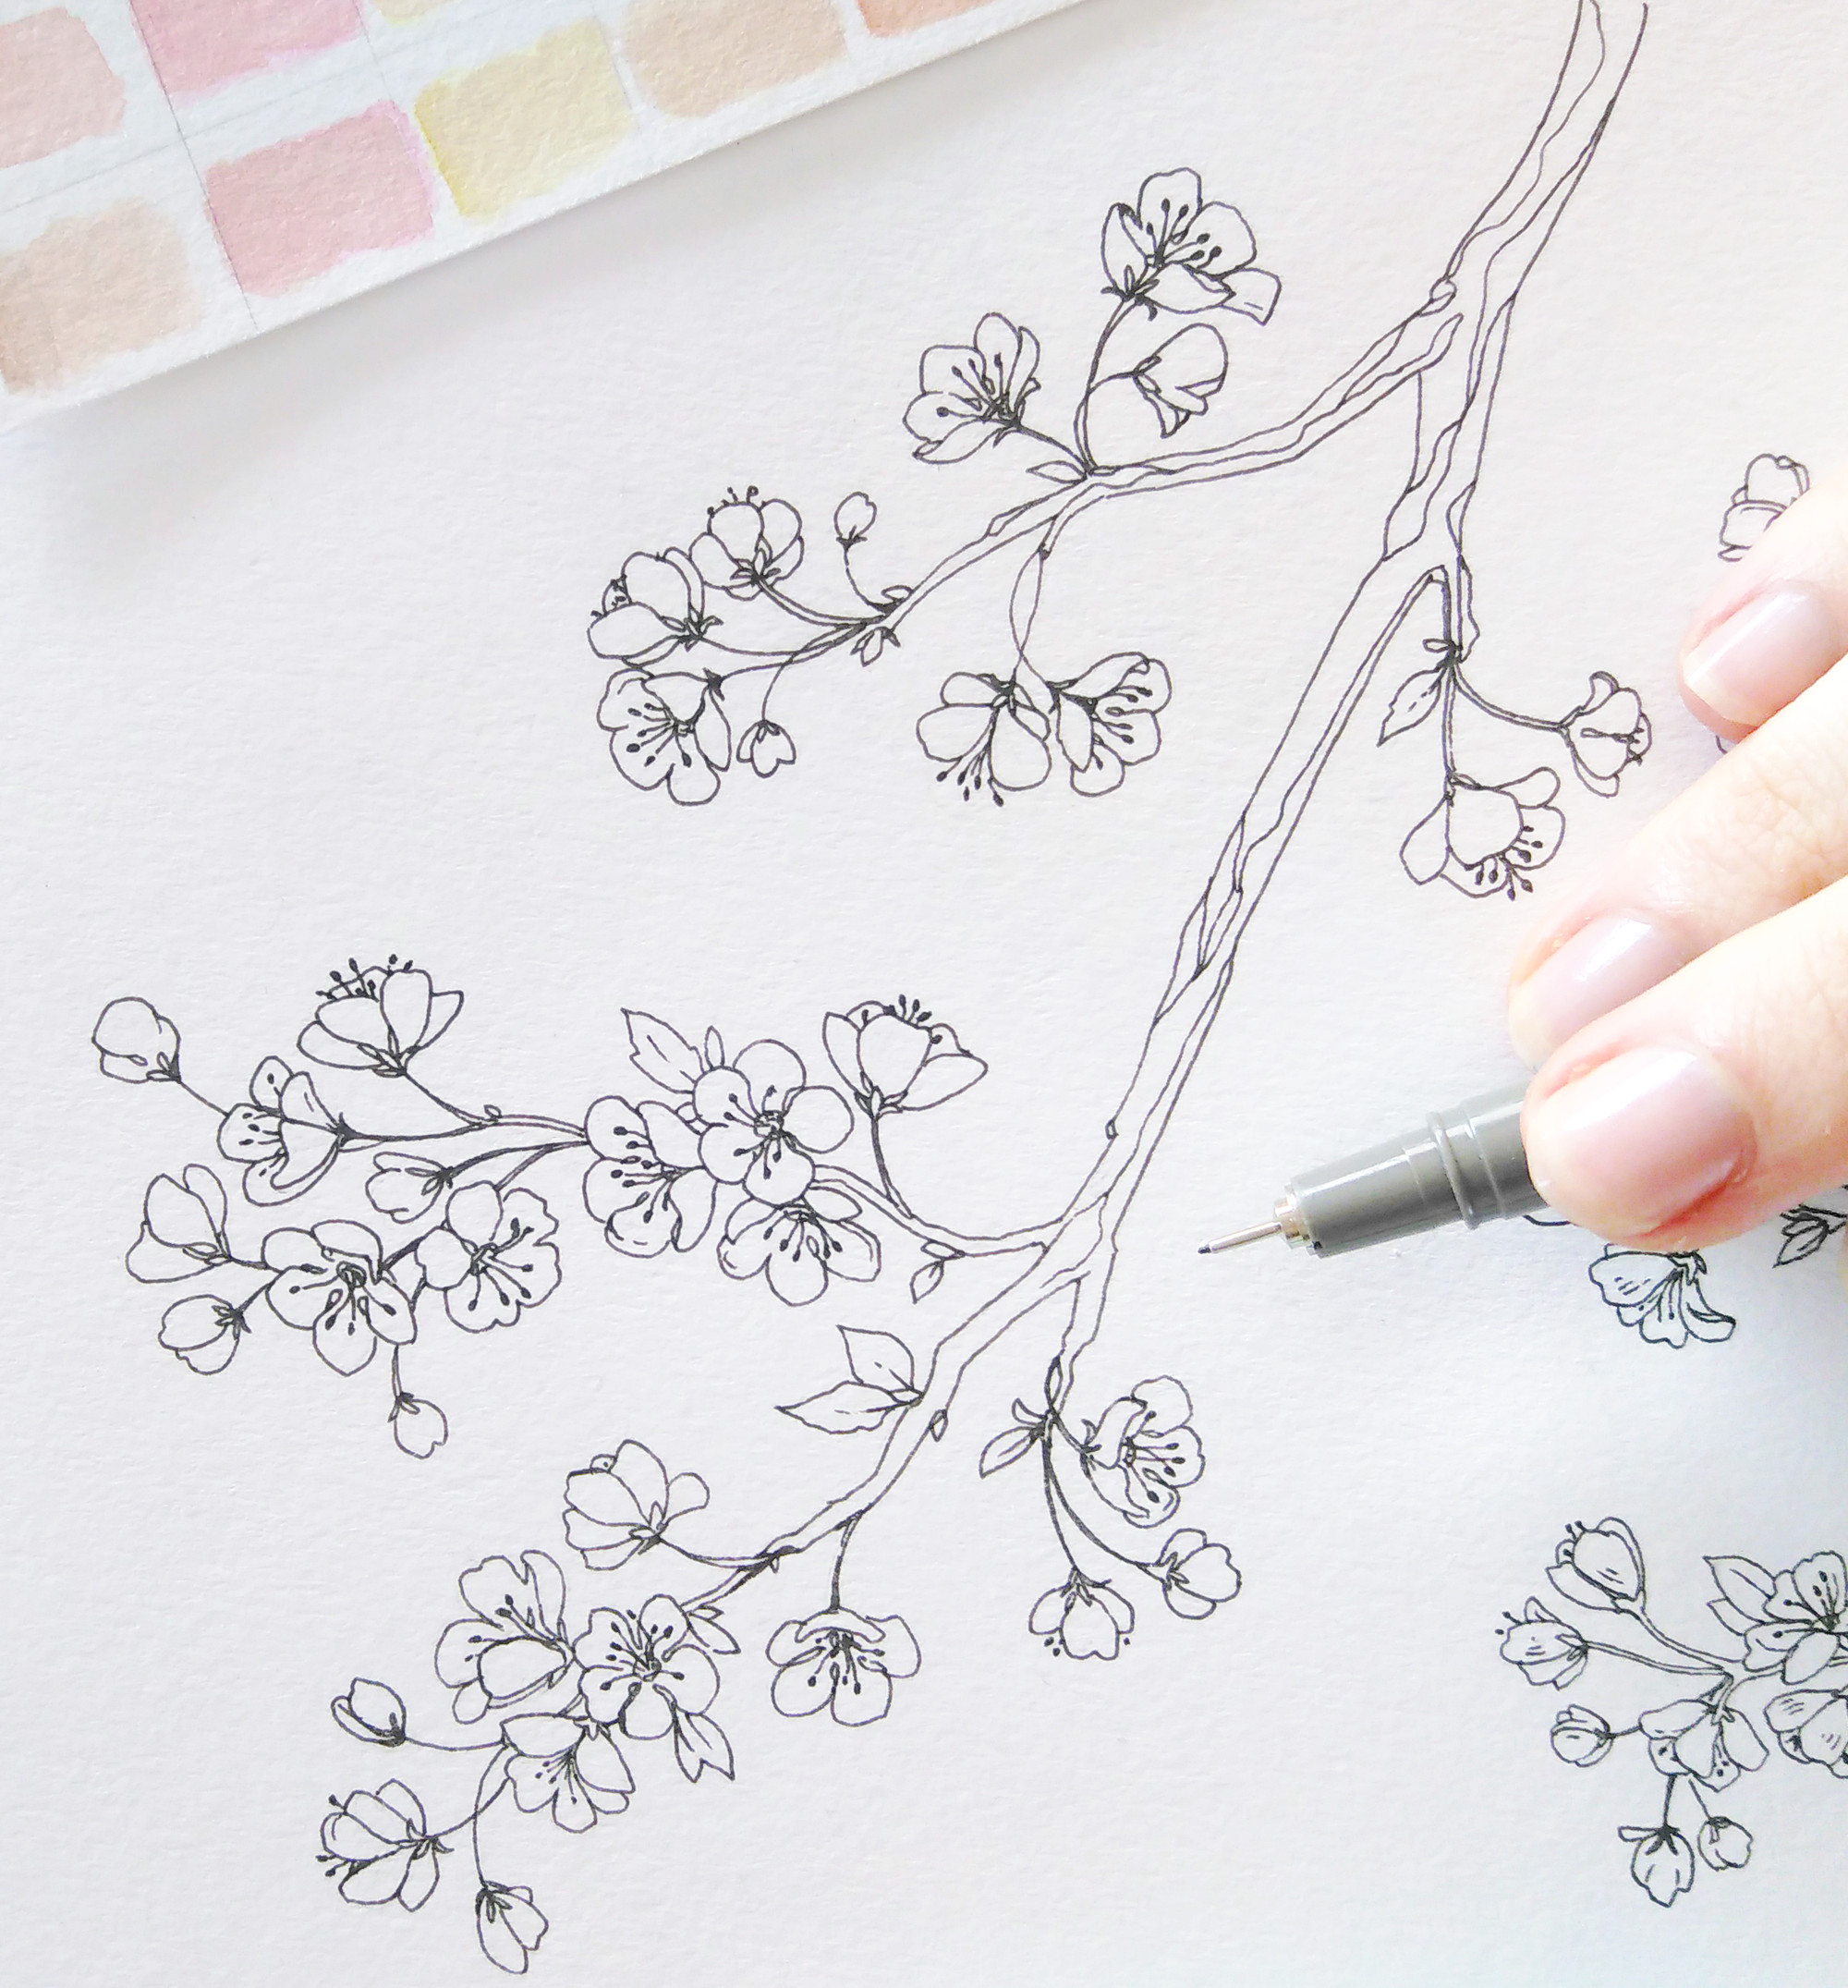 Drawing Flowers On Paper Spring Bullet Journal Layout Cherry Blossoms Art Pinterest